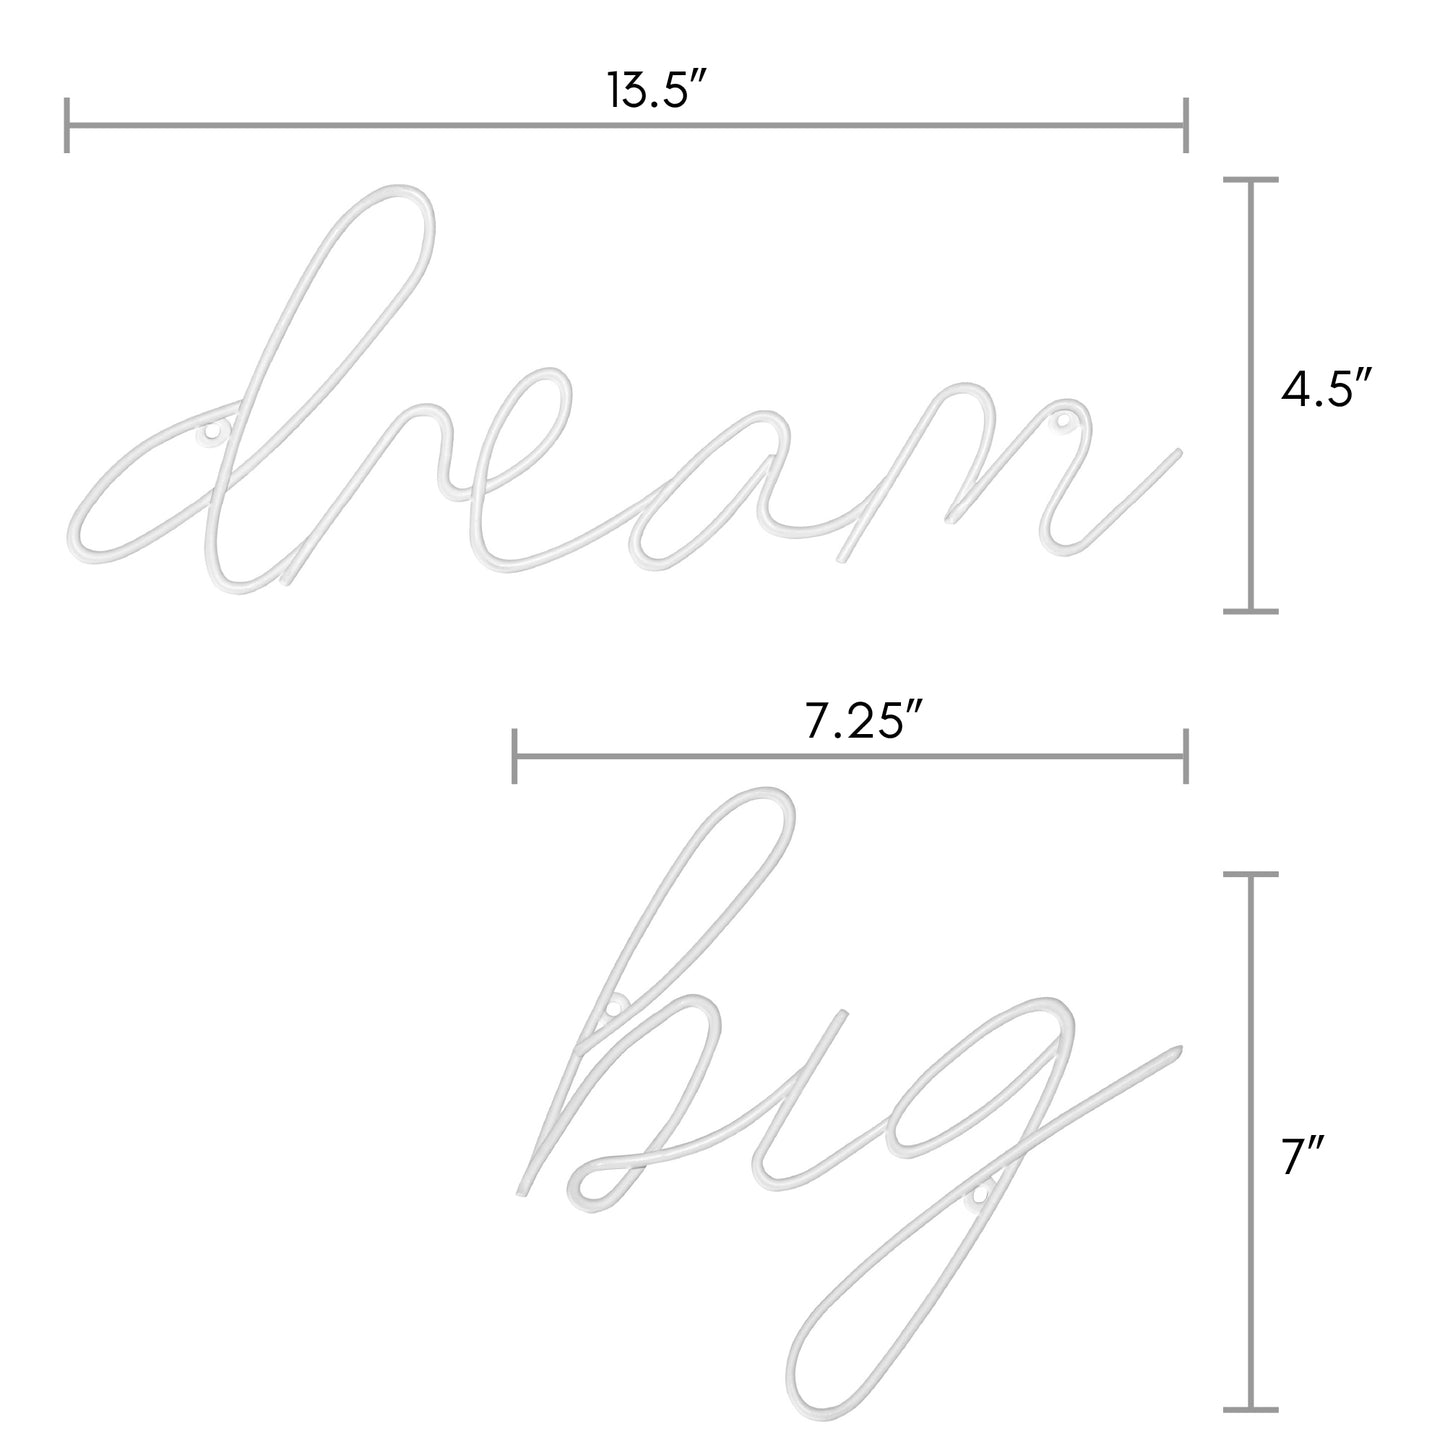 Americanflat - Dream Big Metal Line Art Wall Decor Sculpture Accents for Bedroom - Modern wall decor with Real Metal Abstract Wall Art - Single Line Minimalist Decor Sturdy Iron Hanging Decor